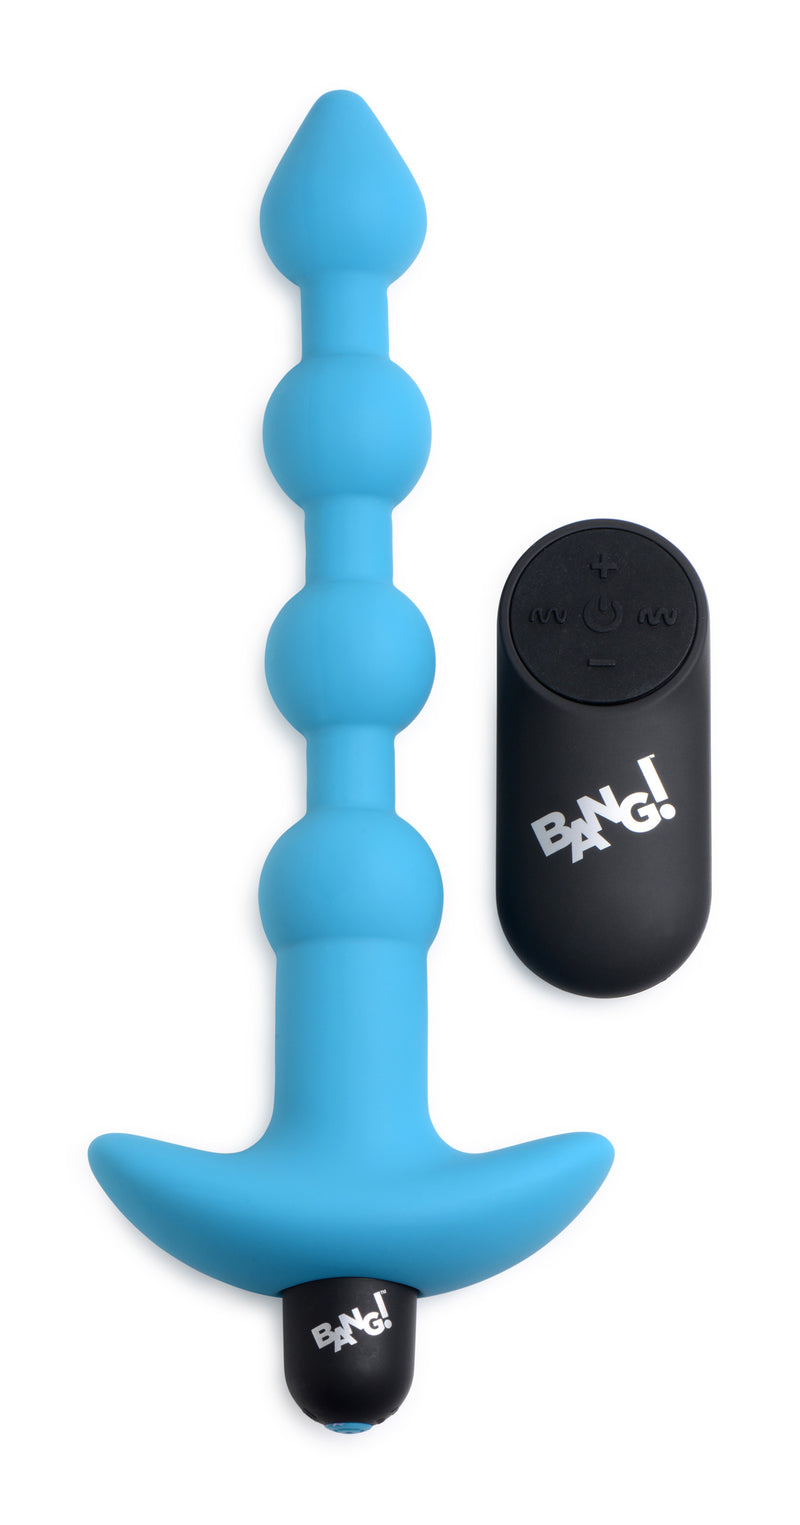 Remote Control Vibrating Silicone Anal Beads - Blue vibesextoys from Bang